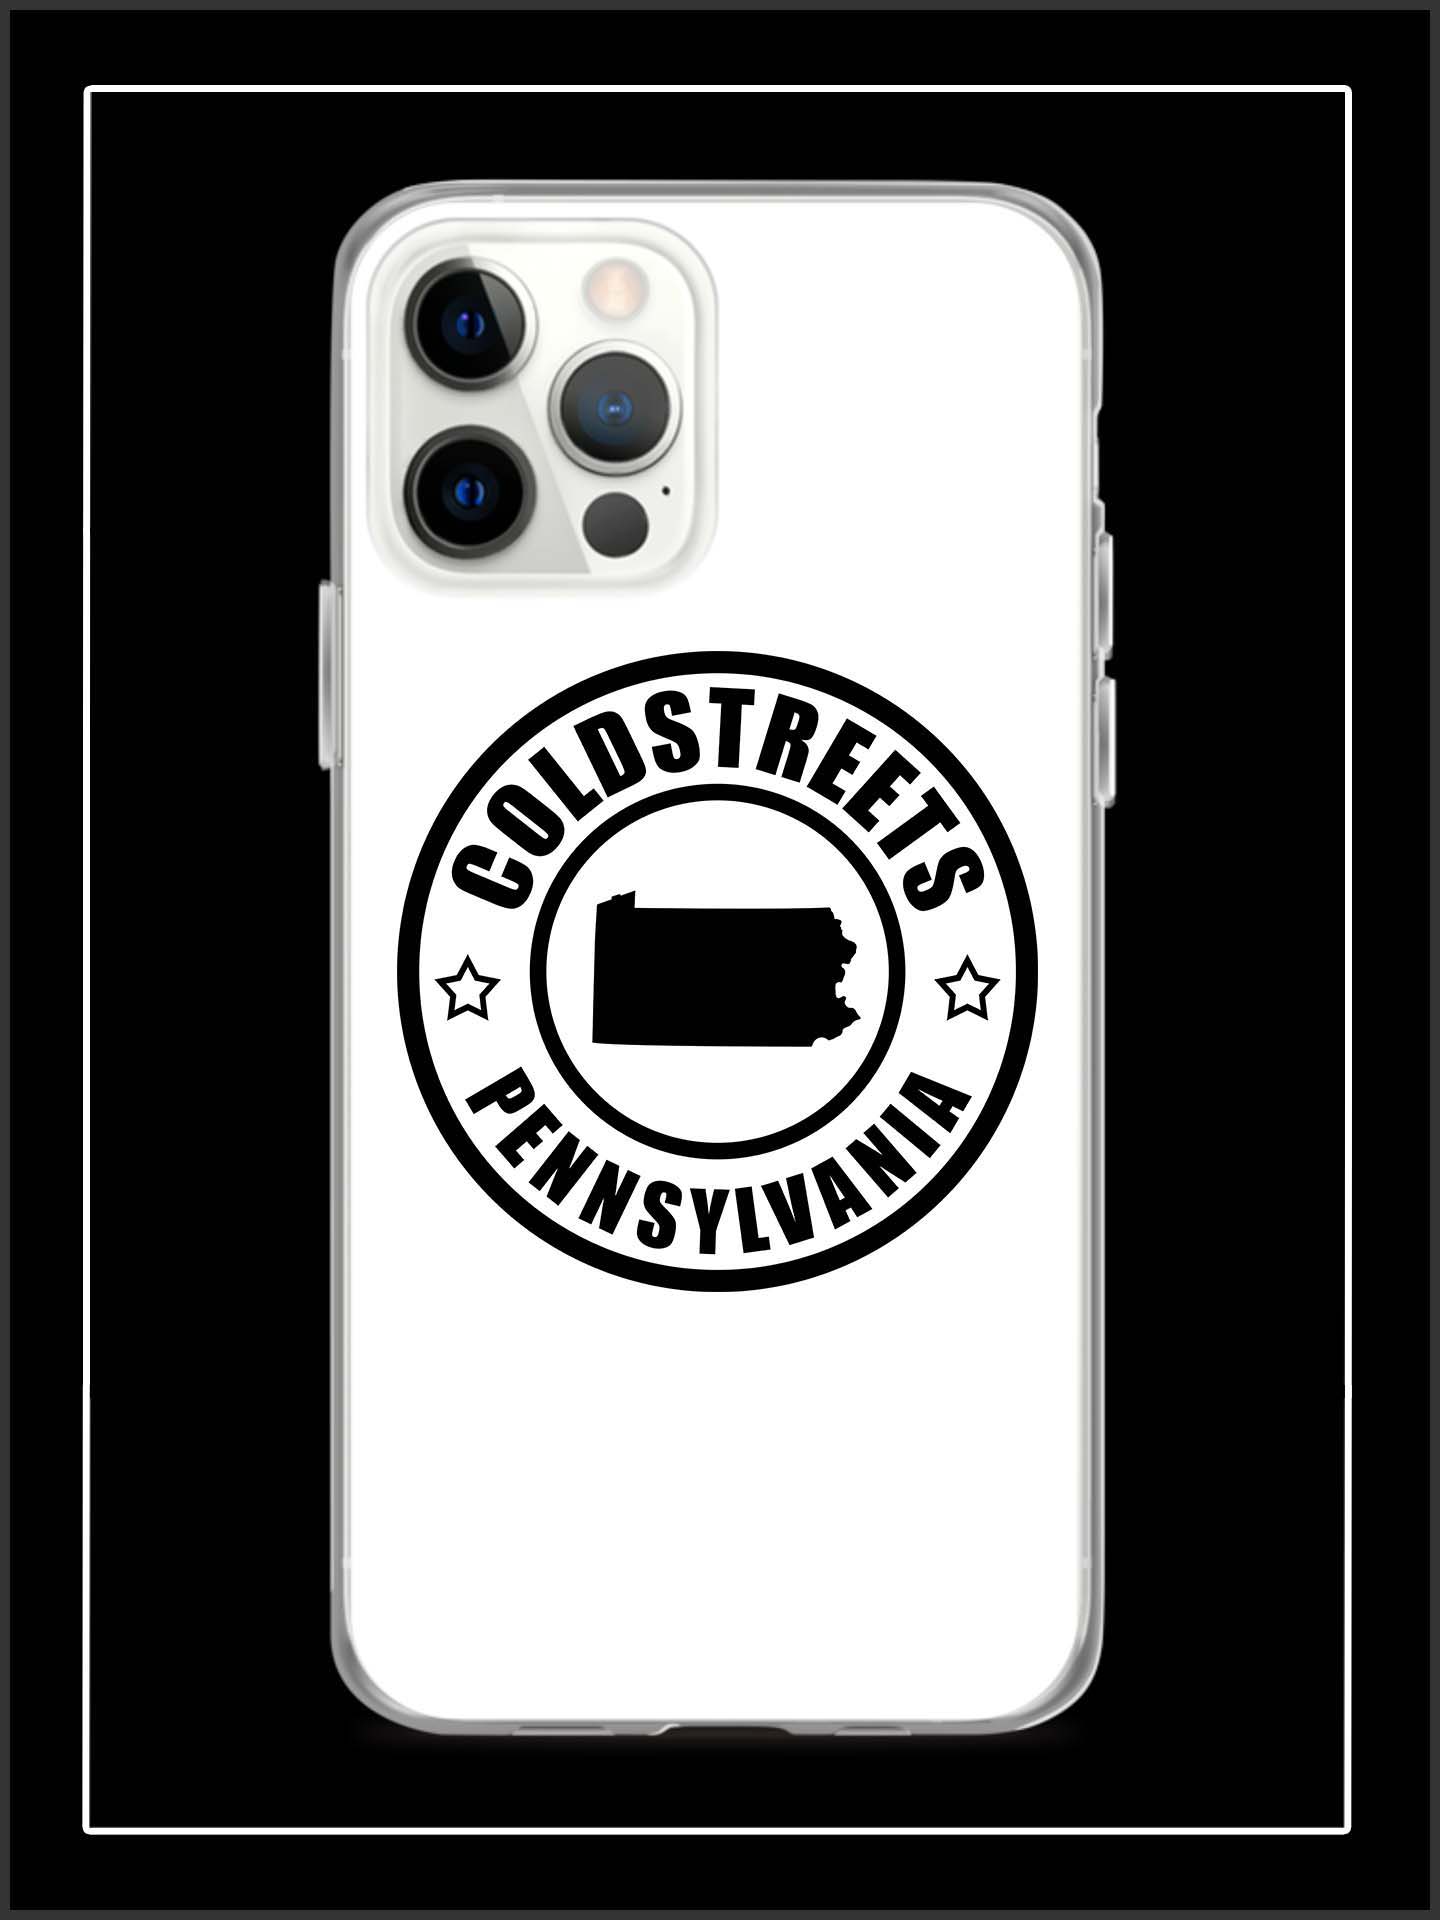 Cold Streets Pennsylvania iPhone Cases